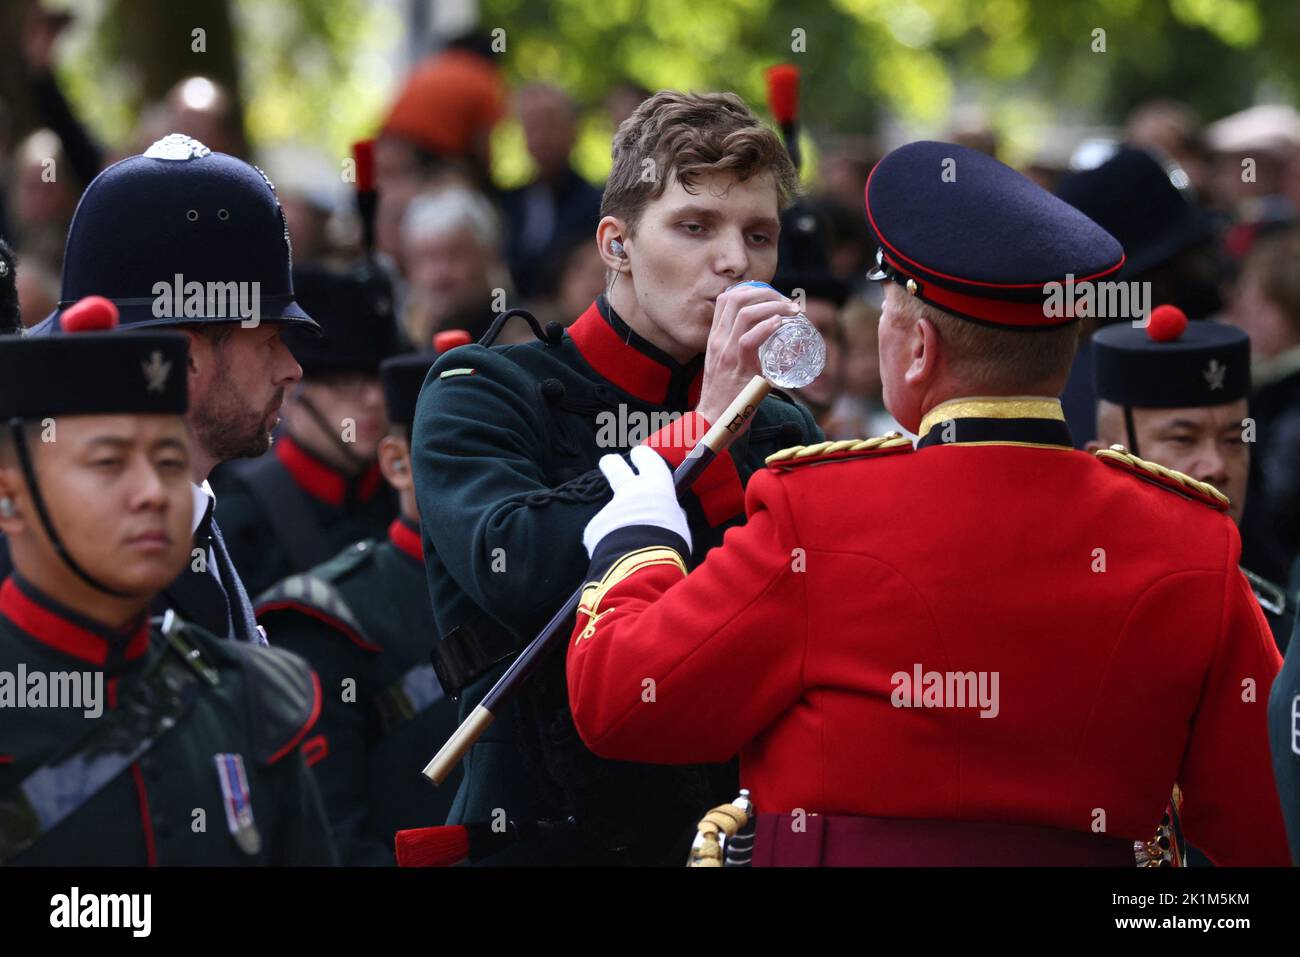 A member of the band drinks water after receiving medical attention on the day of the state funeral and burial of Britain's Queen Elizabeth, in London, Britain, September 19, 2022. REUTERS/Tom Nicholson Stock Photo